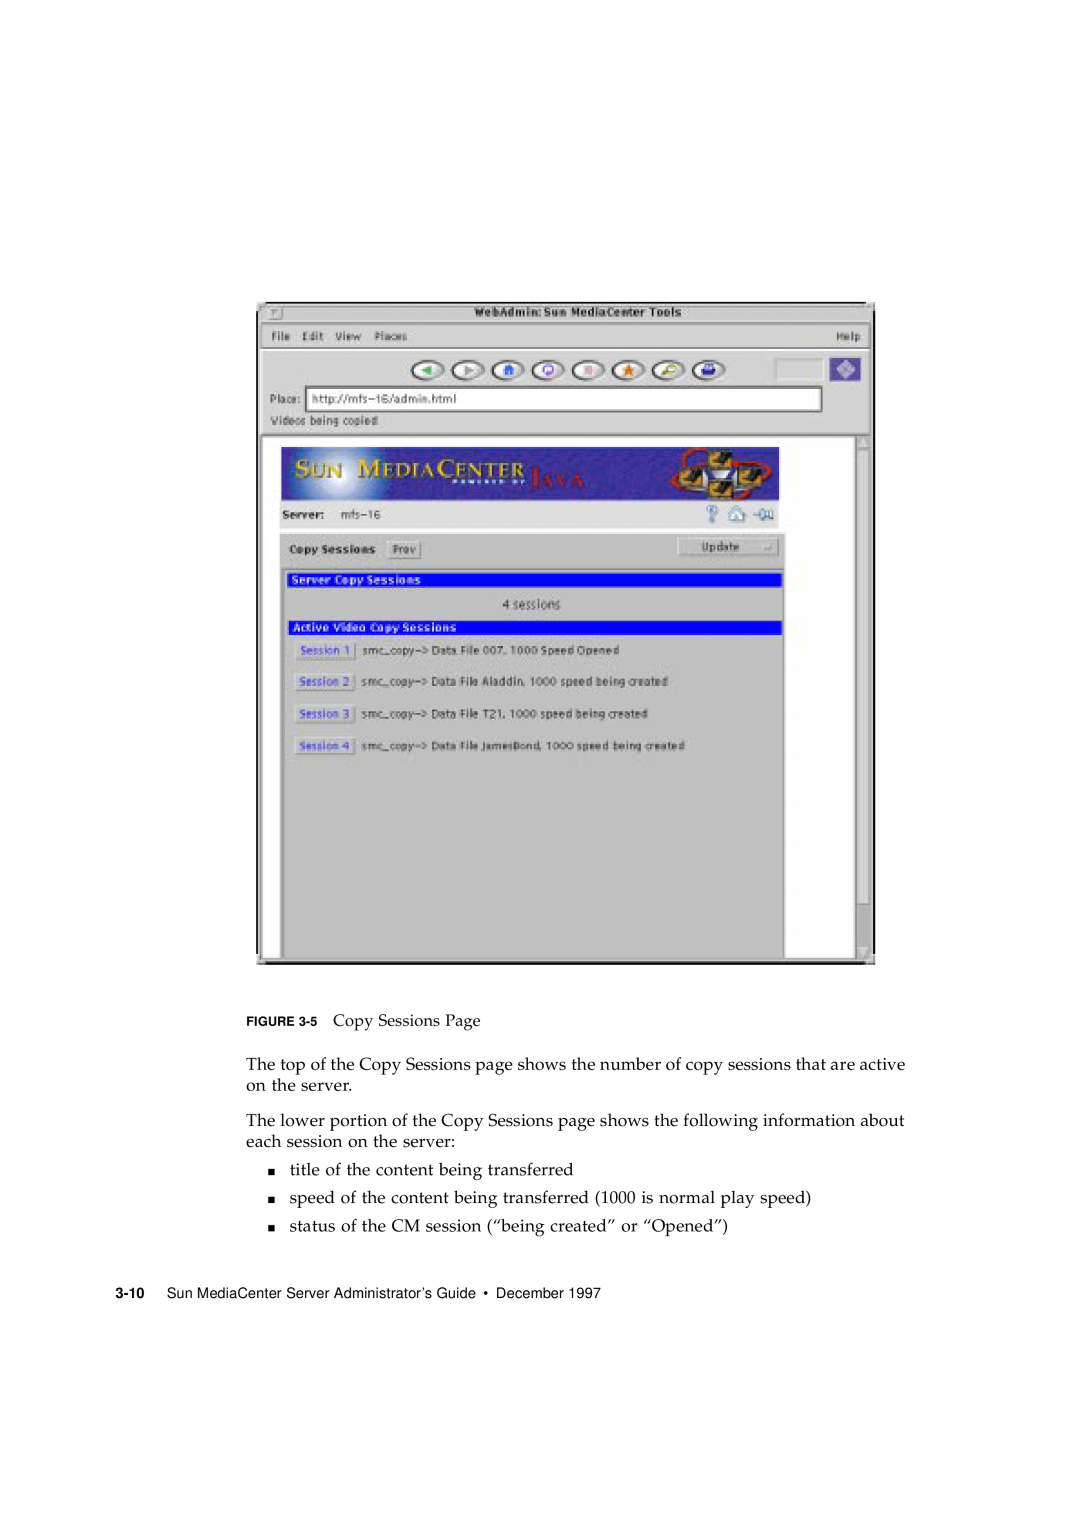 Sun Microsystems 2.1 manual title of the content being transferred 